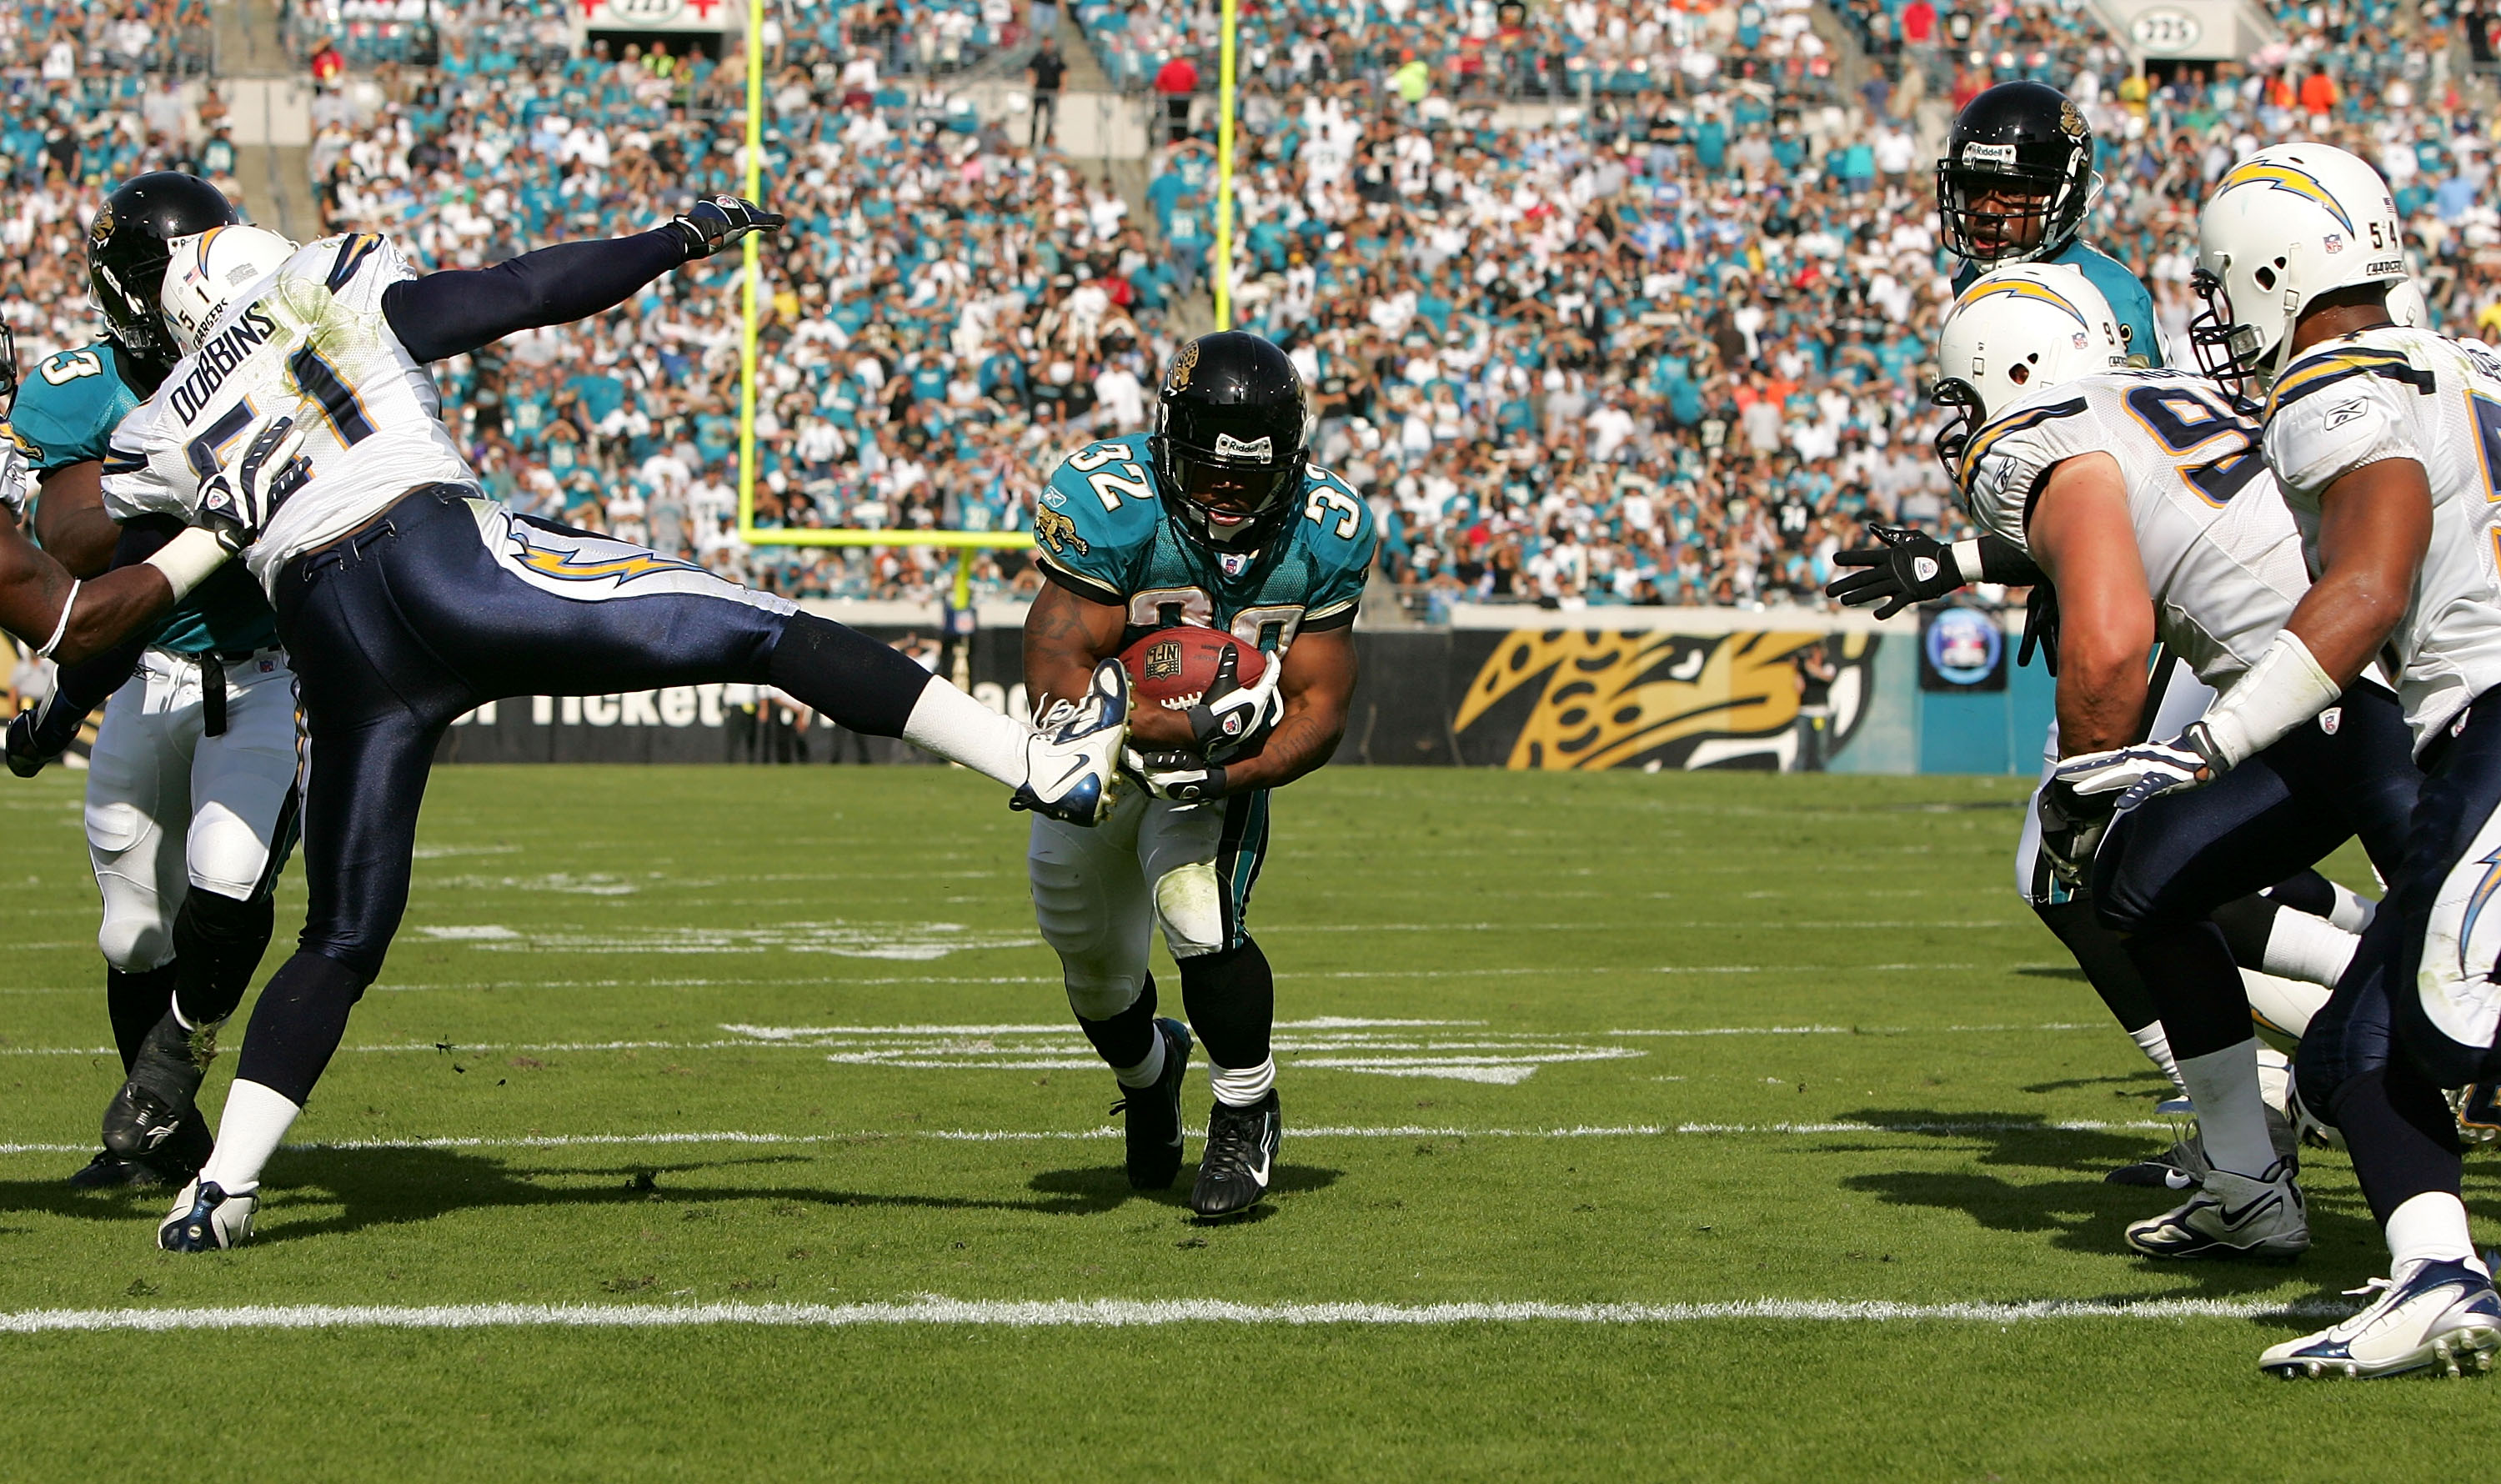 JACKSONVILLE, FL - NOVEMBER 18:  Maurice Jones-Drew #32 of the Jacksonville Jaguars scores a touchdown in a game against the San Diego Chargers at Jacksonville Municipal Stadium on November 18, 2007 in Jacksonville, Florida. (Photo by Sam Greenwood/Getty